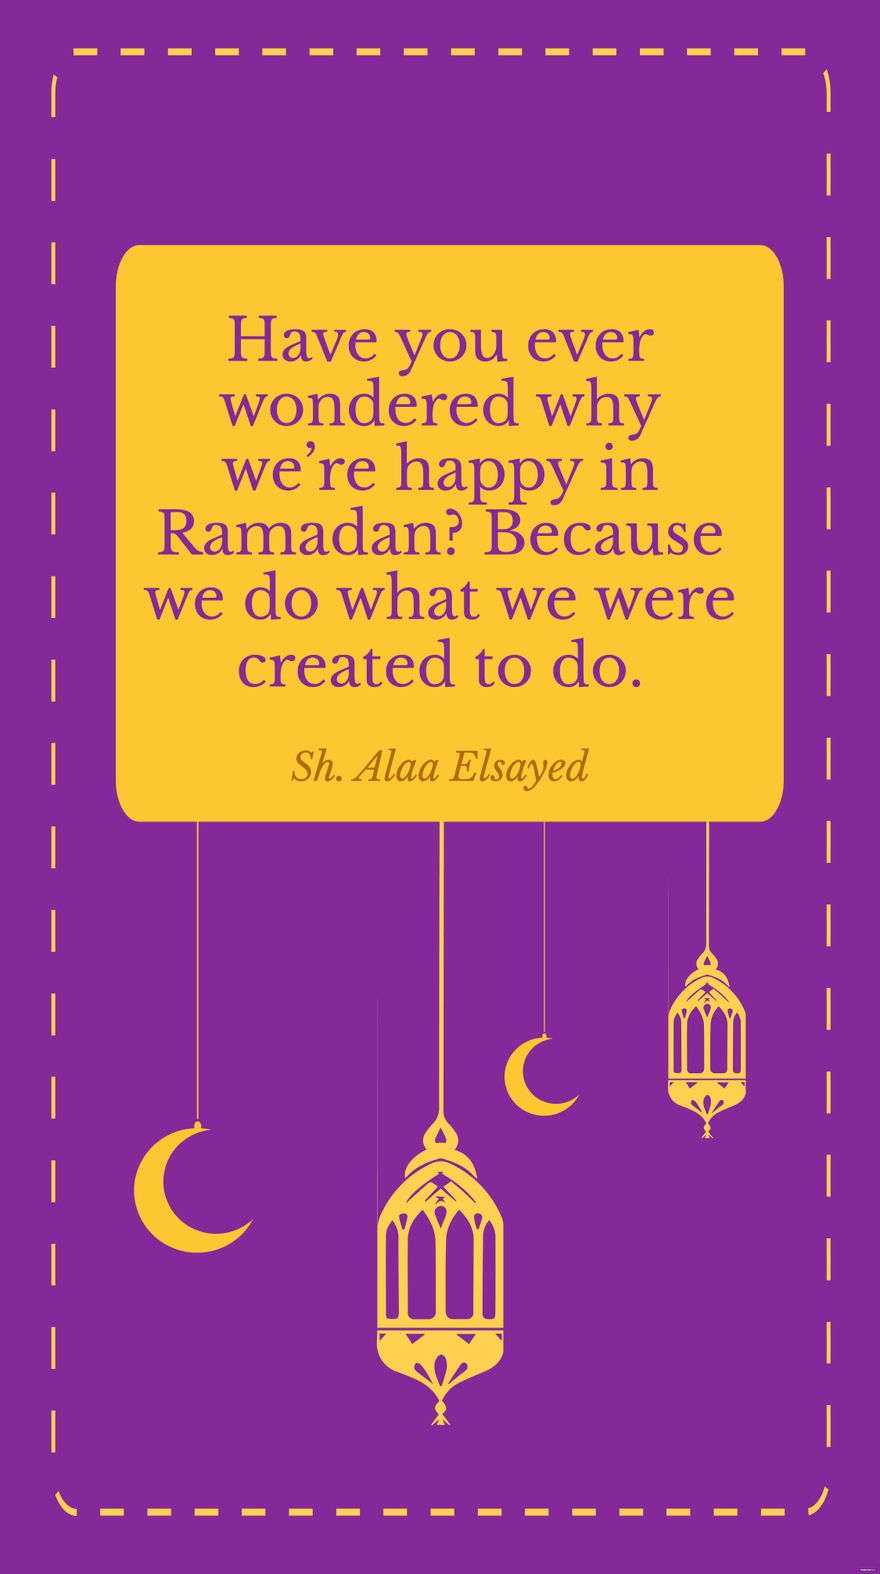 Free Sh. Alaa Elsayed - Have you ever wondered why we’re happy in Ramadan? Because we do what we were created to do.